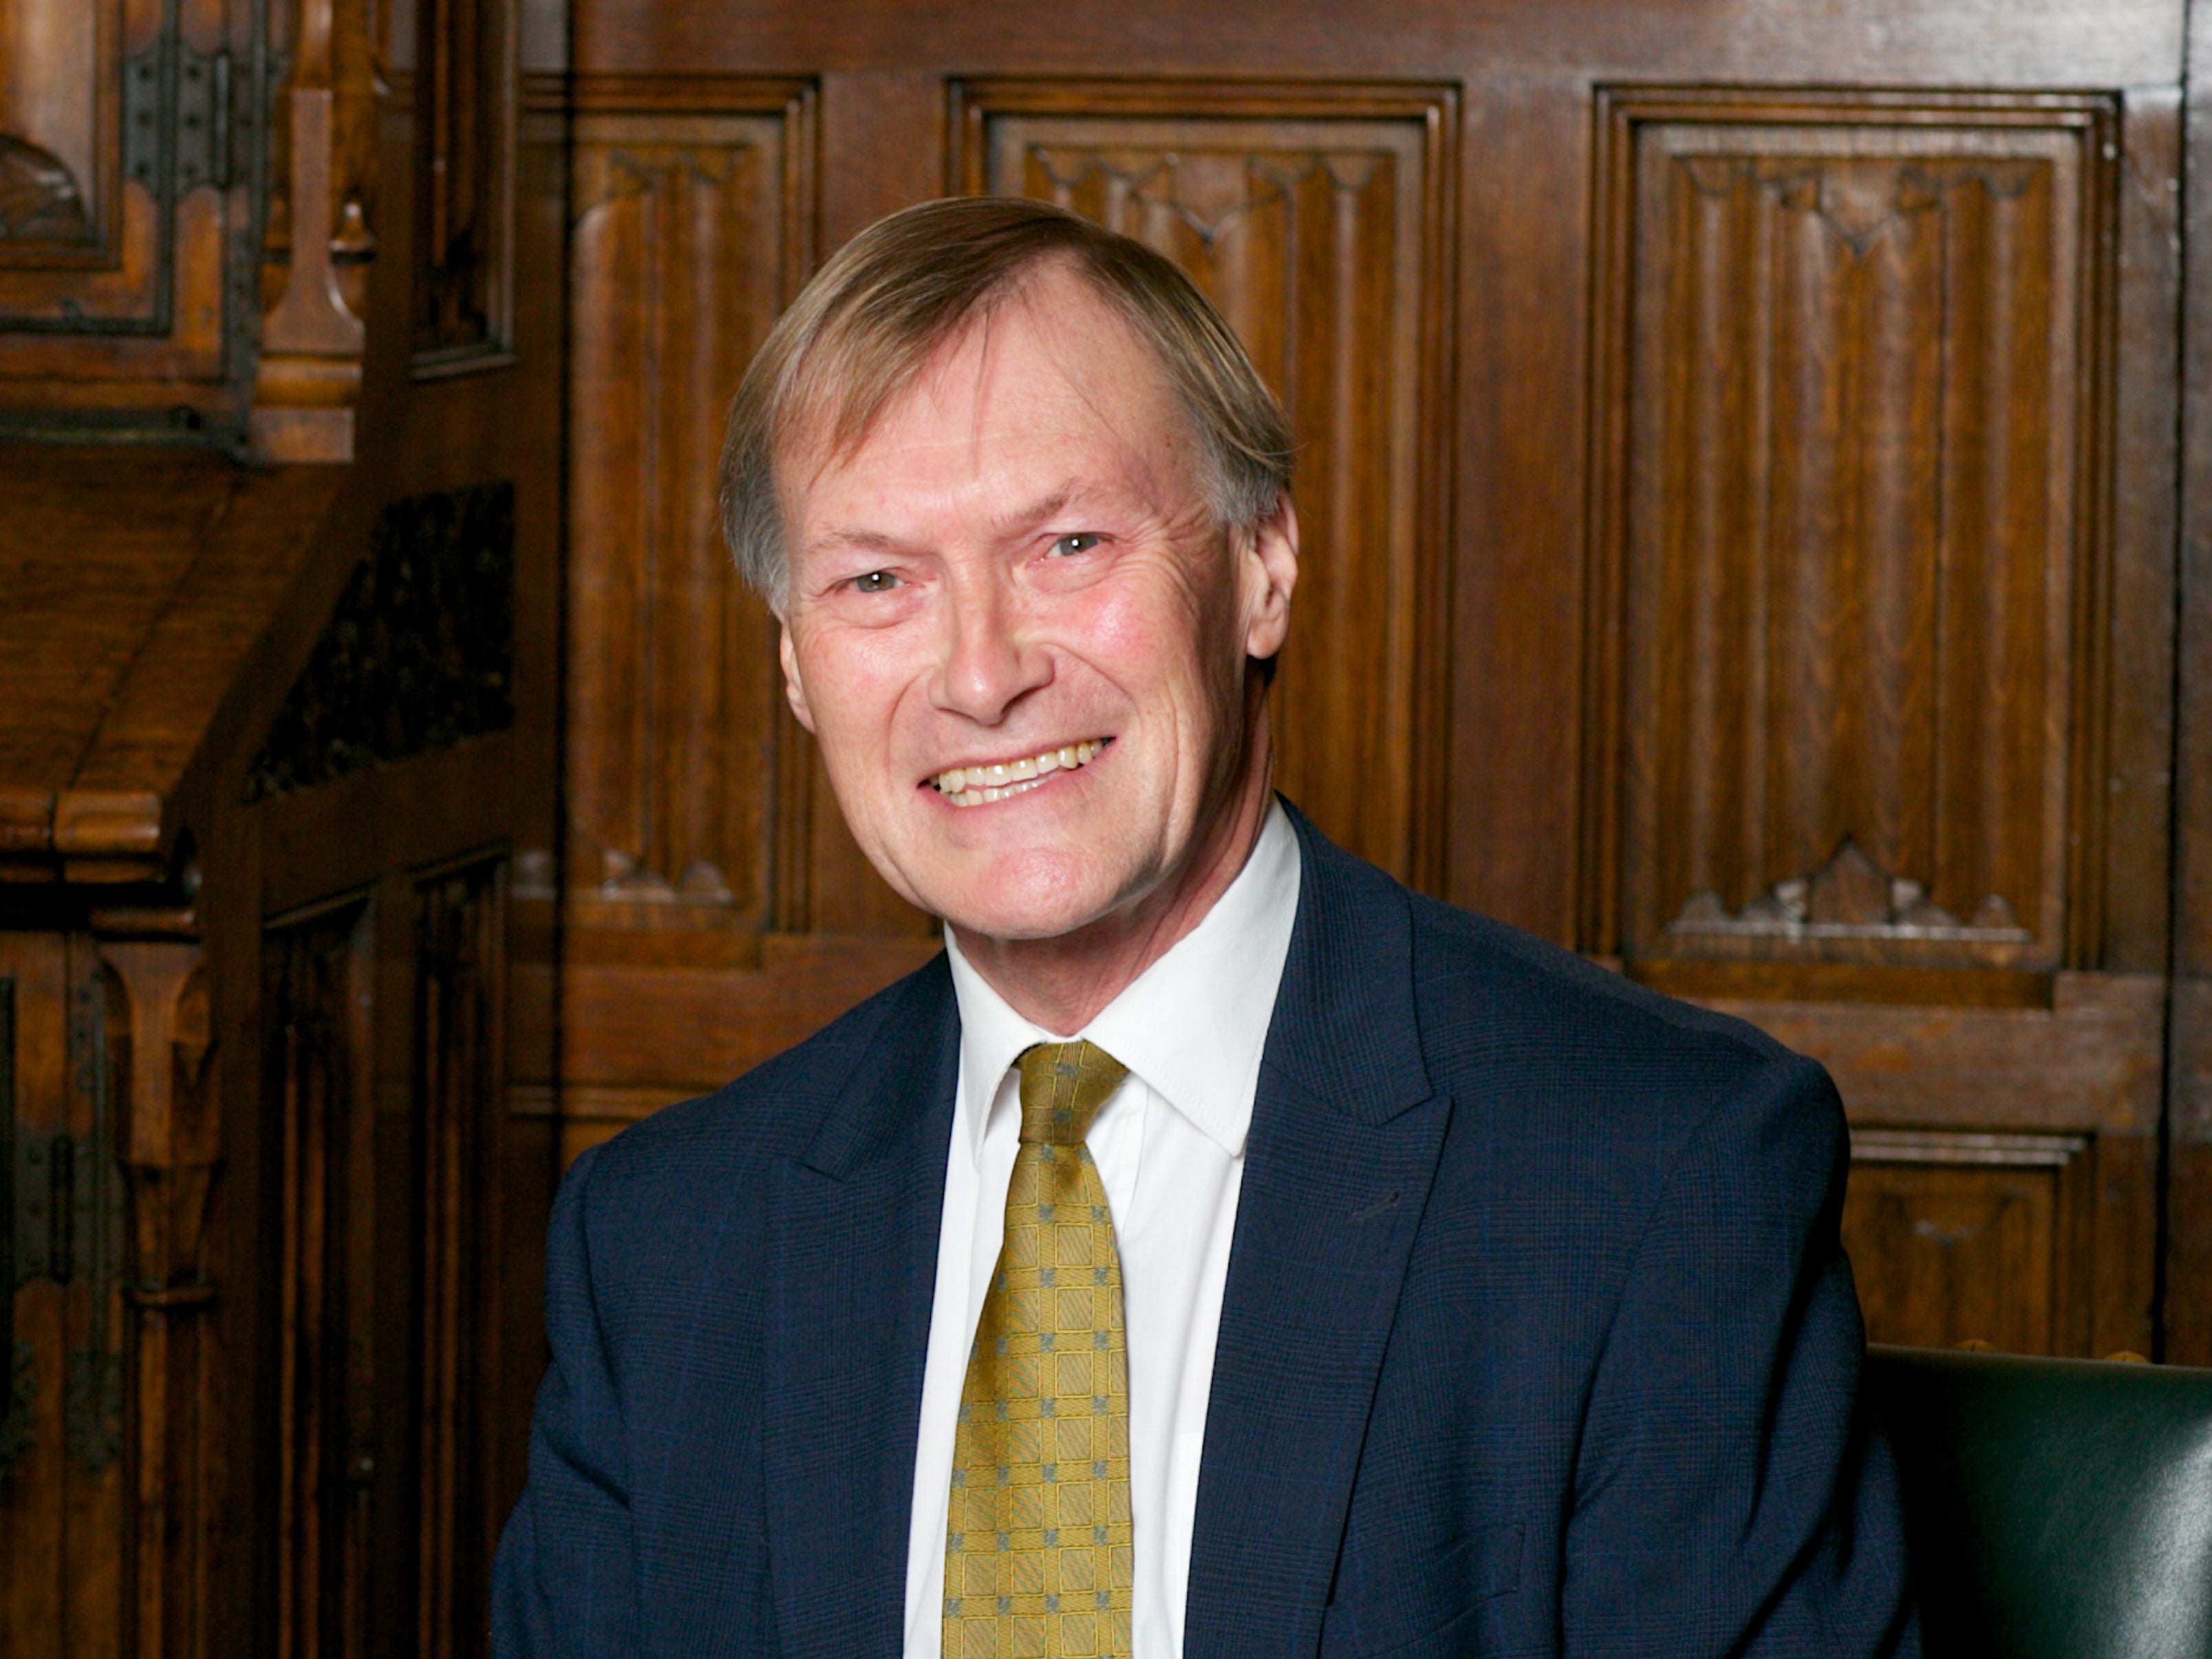 Amess was one of Westminster’s longest-serving MPs